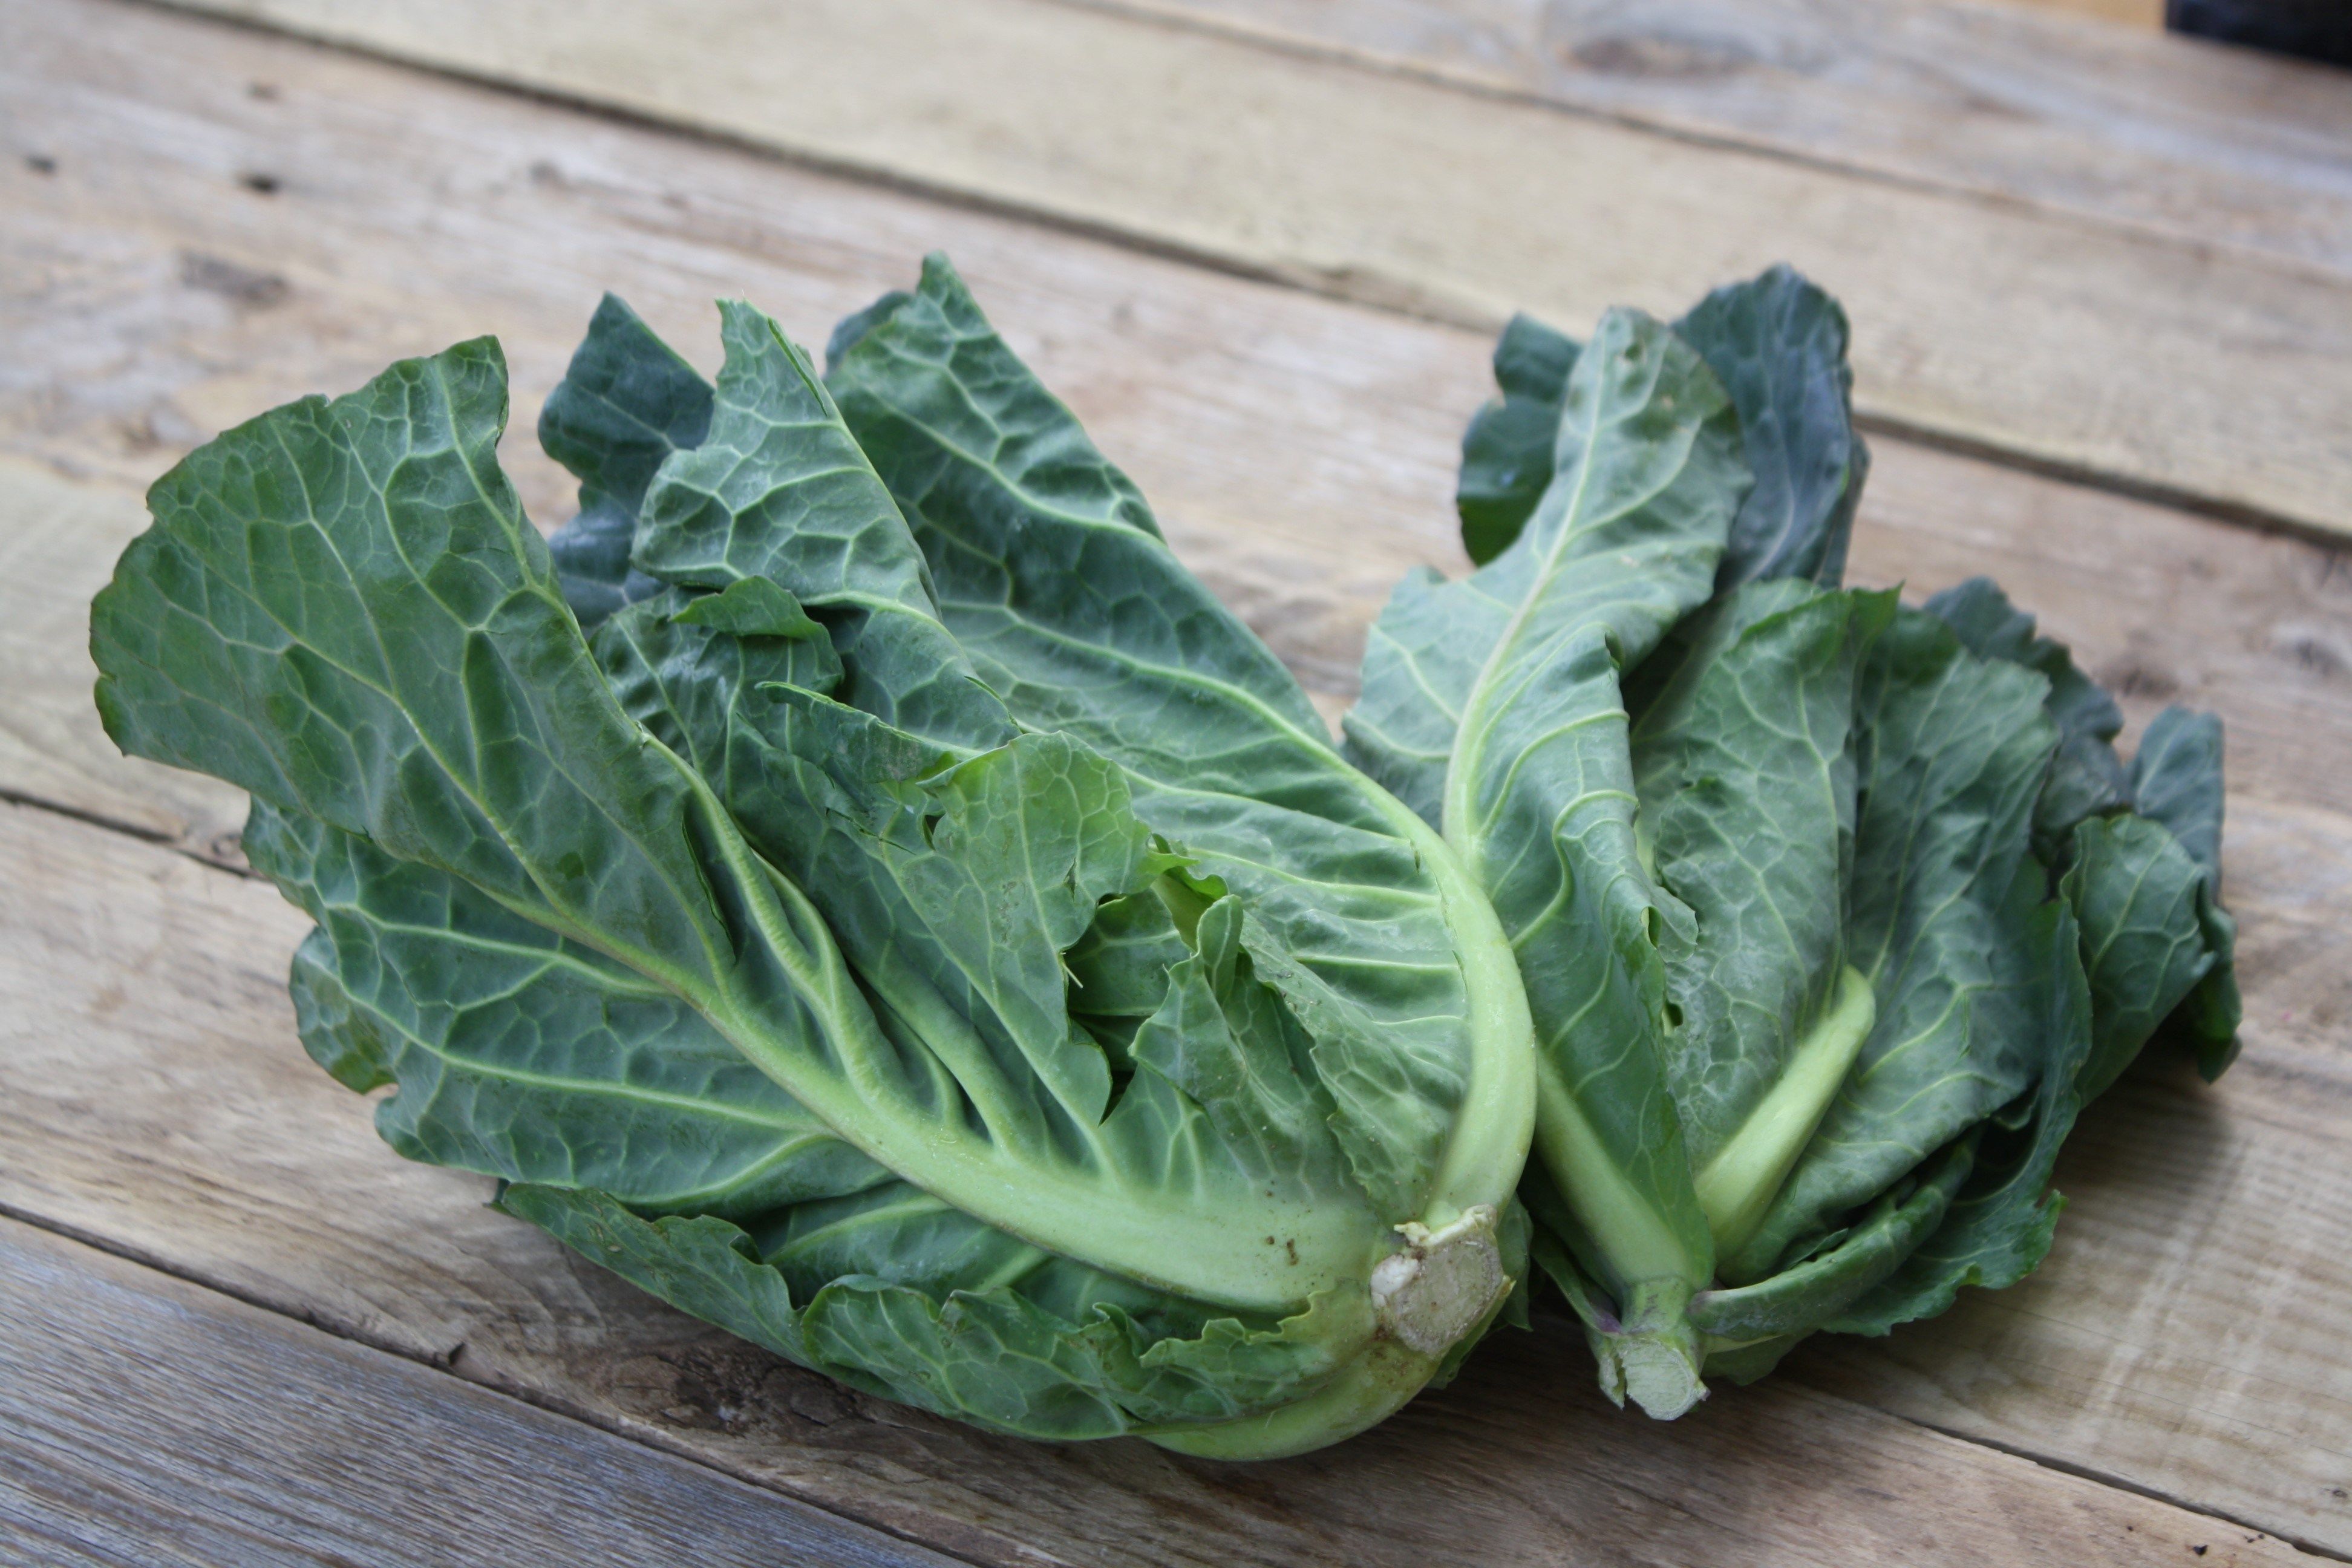 Veg of the month: Spring Greens